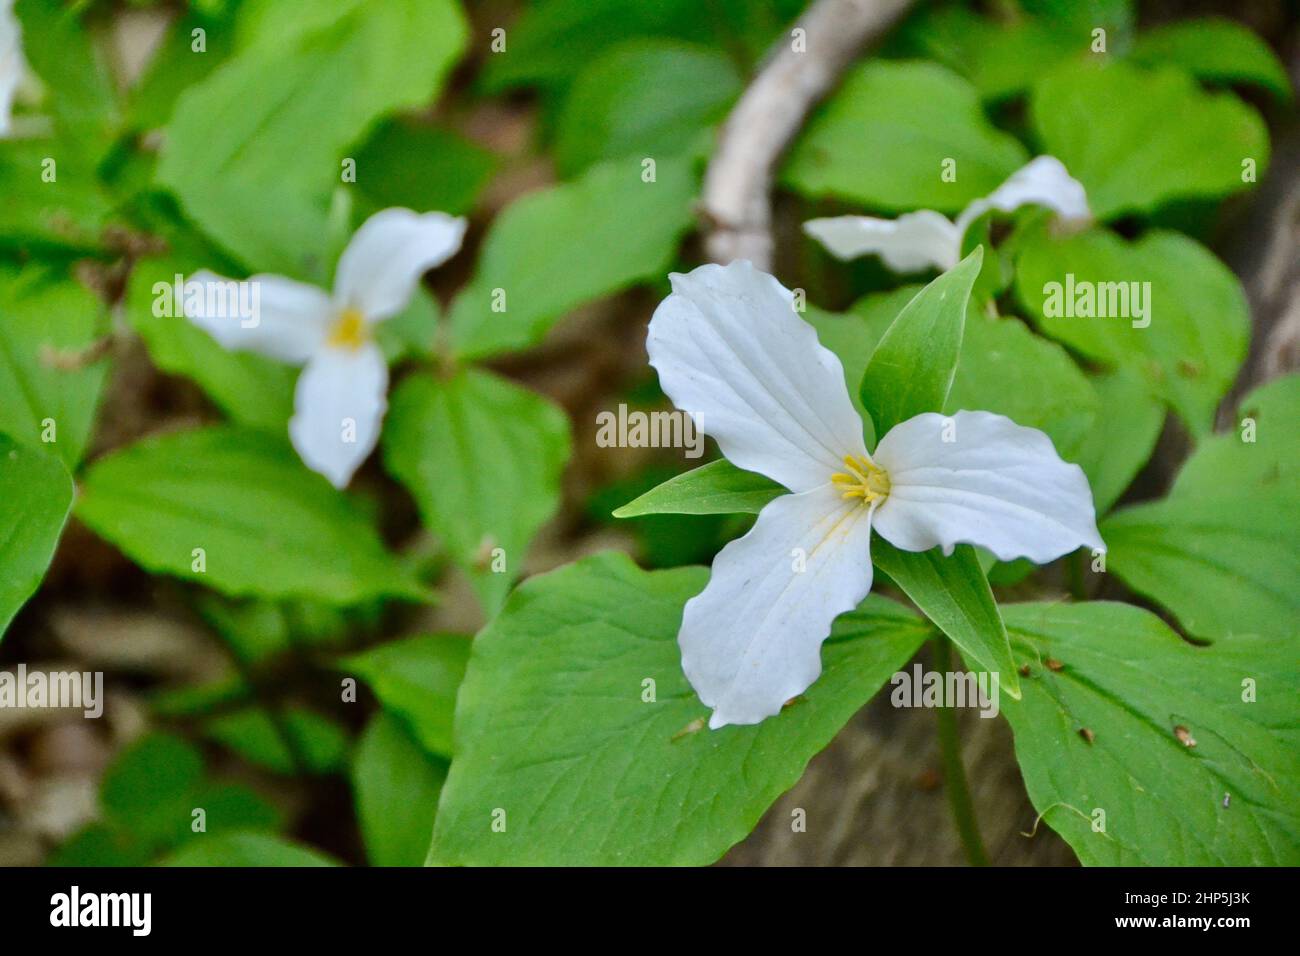 Closeup group of white trillium flowers blooming in forest during Spring Stock Photo